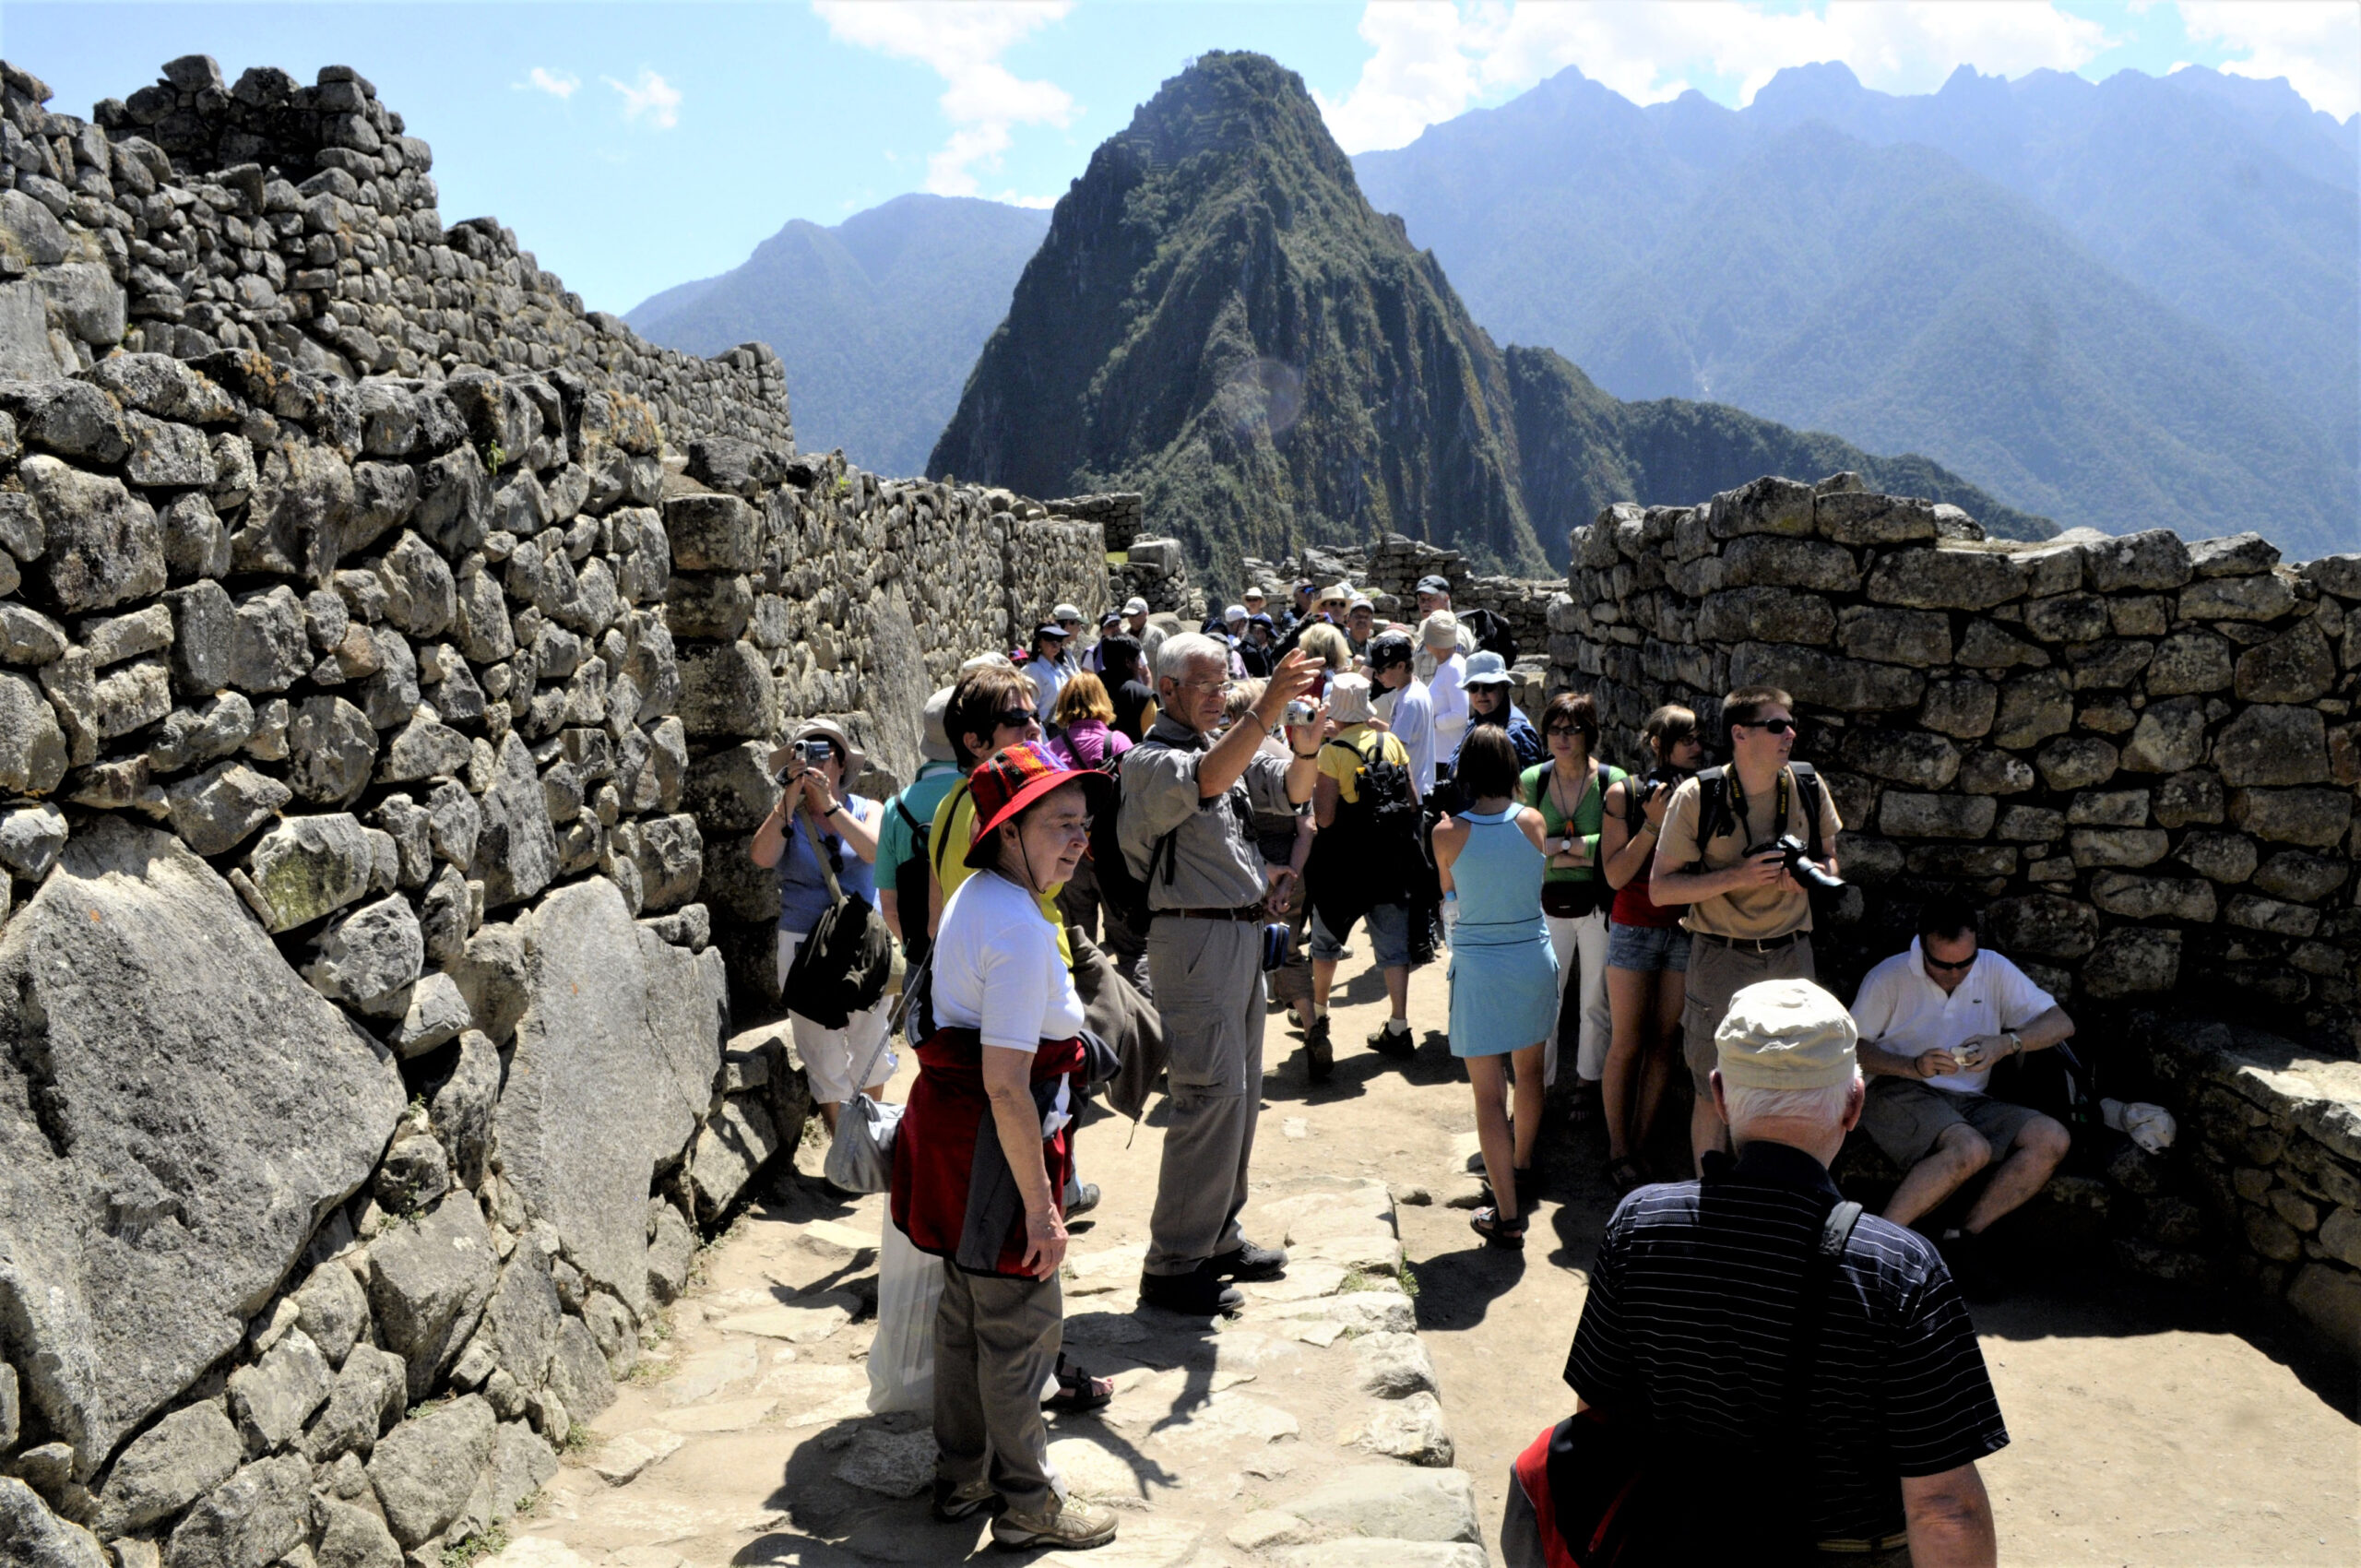 <p>Plenty of people are attracted to Machu Picchu for the chance to admire gorgeous ancient architecture and stunning views. To be more specific, Machu Picchu is located on top of an Incan mountain in Peru. It’s a citadel that garners attention from people all over the globe.</p> <p>The recommended daily limit of guests at Machu Picchu is 2,500. Recently, more than 5,000 visitors have been making their way up to Machu Picchu every single day. For this reason, it might be best to skip a vacation in Machu Picchu and choose a less populated spot. (In an effort to recoup tourism revenue lost during the beginning of the year, Peru is raising the daily limit on visitors to Machu Picchu from its previous cap to 5,600 people per day. This measure aims to account for the economic impact to the popular destination from having fewer international travelers over the past few years.)</p>